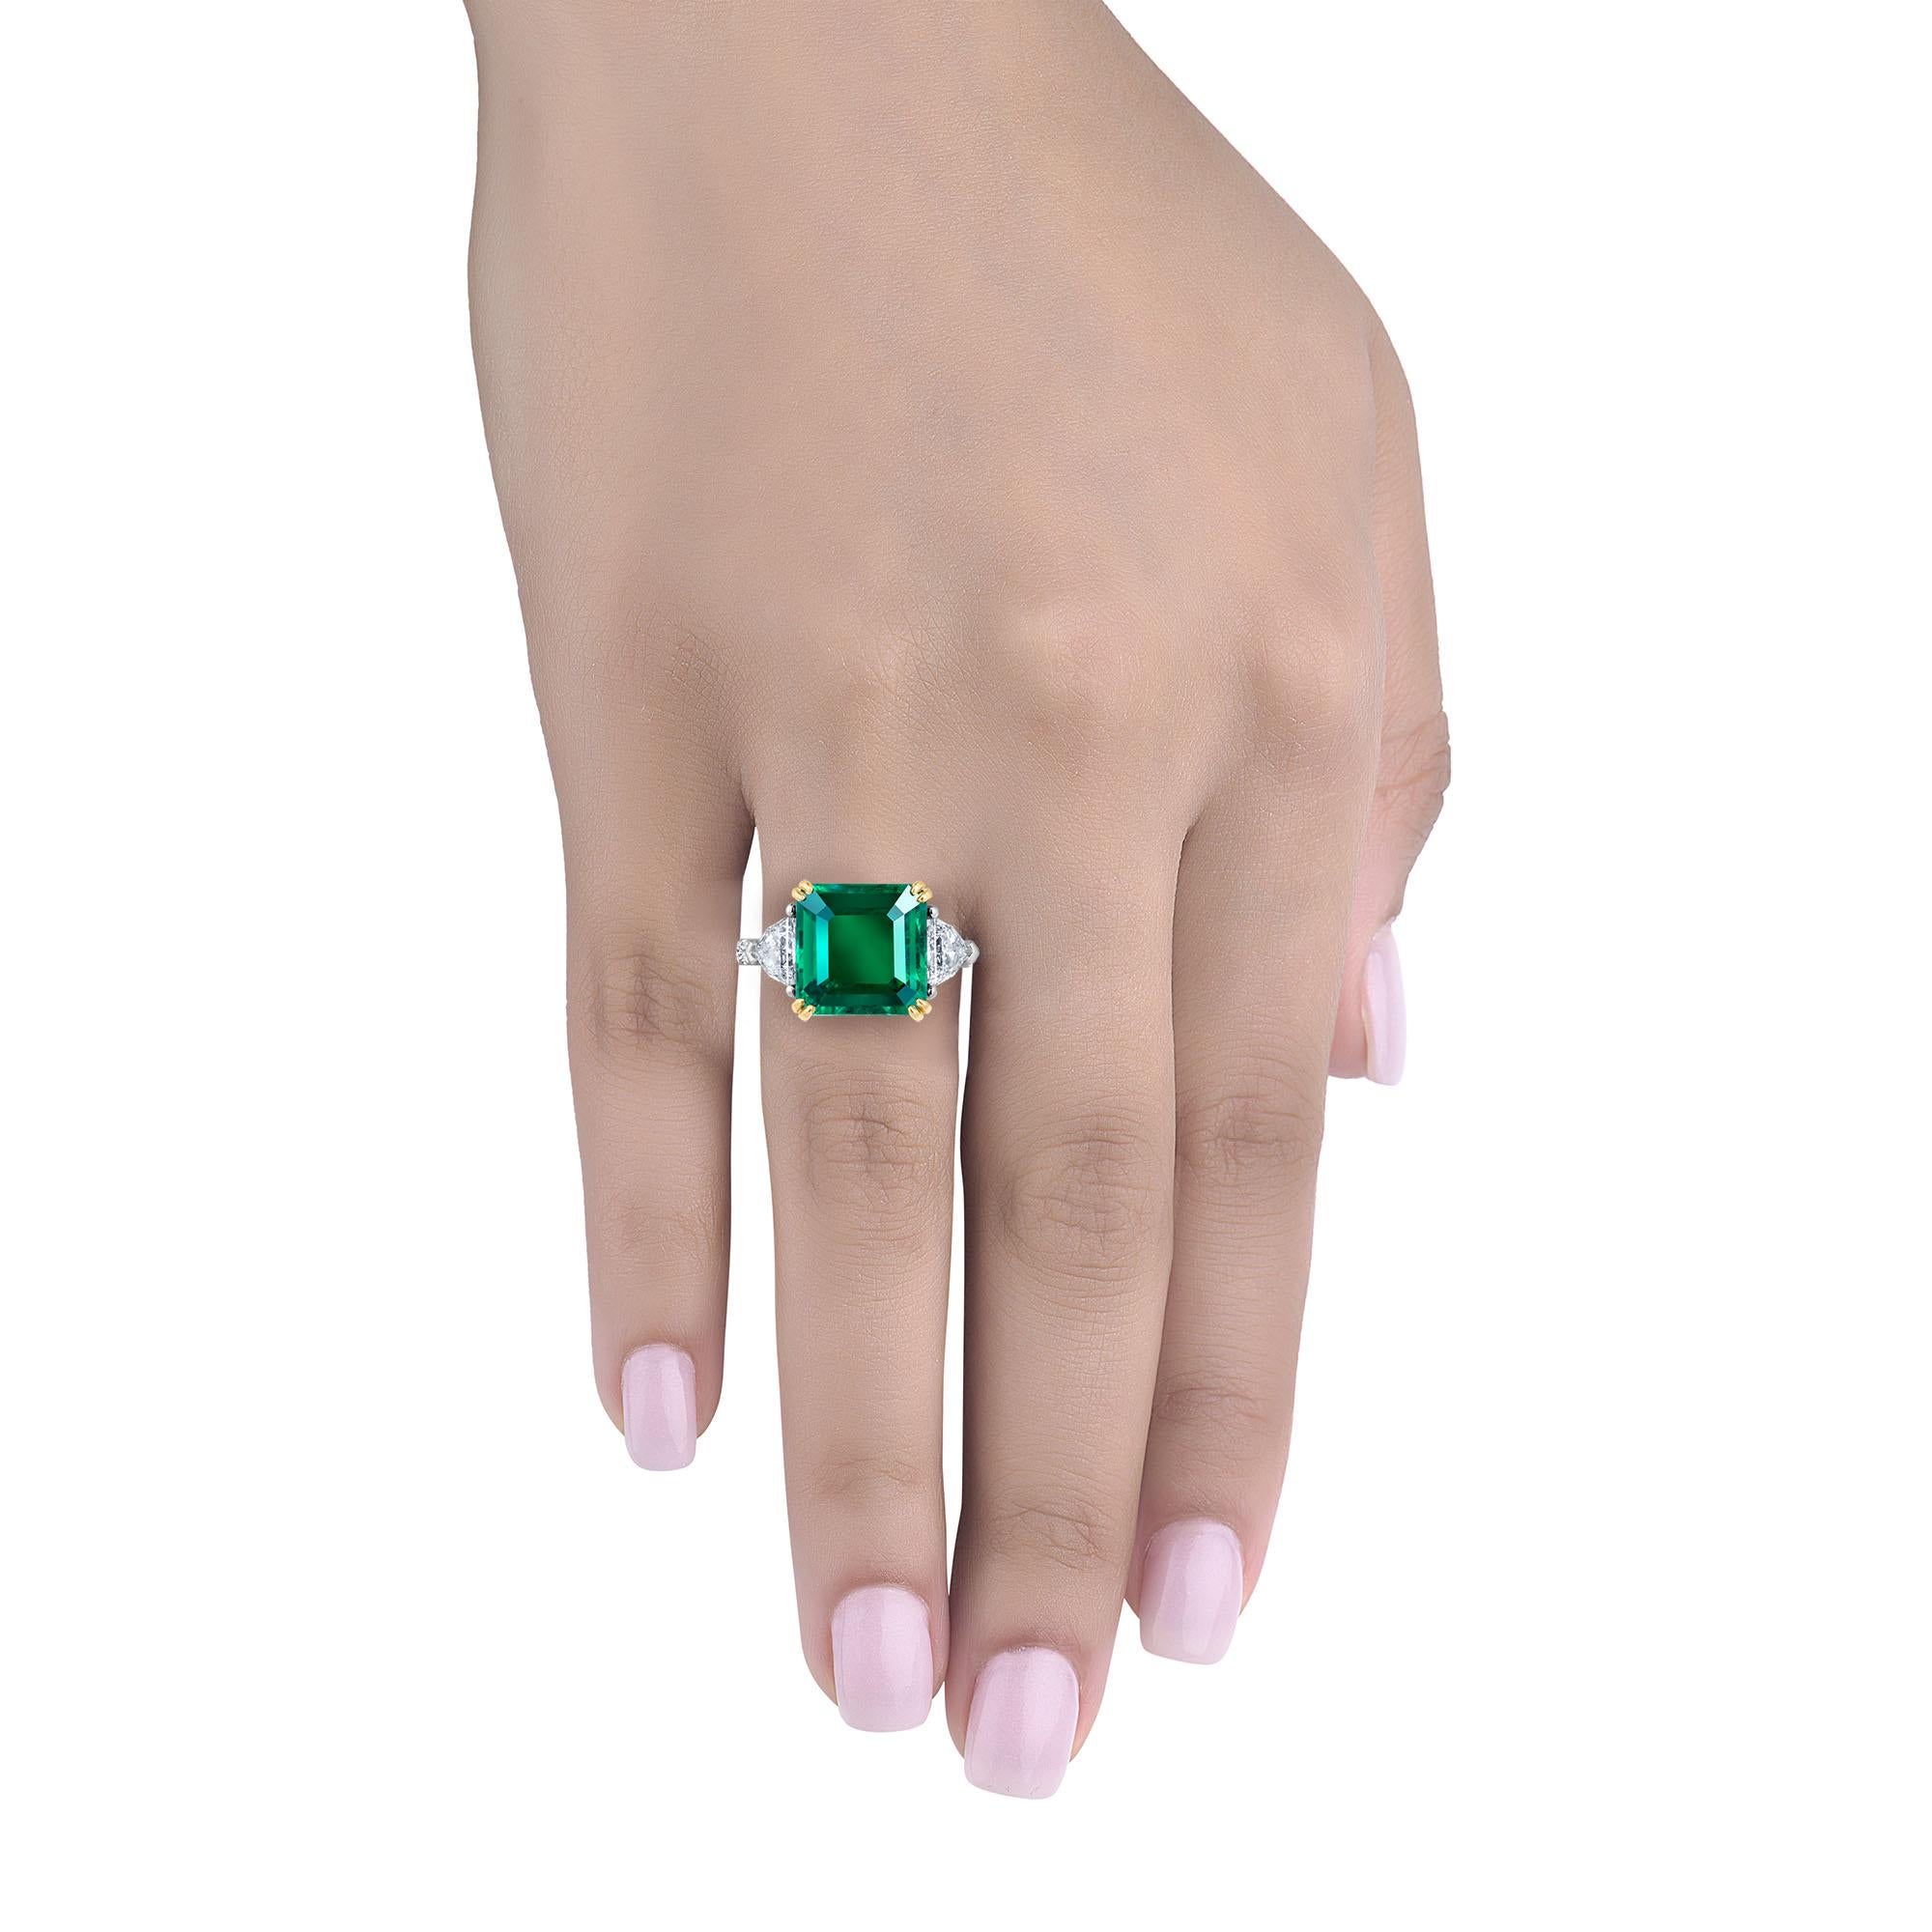 Hand made in the Emilio Jewelry Factory, A gorgeous bright Certified Emerald cut Zambian Genuine Emerald 4.01 Carats set in the center. The emerald is very clean and completely eye clean.  The material of this emerald is absolutely gorgeous! 
Center